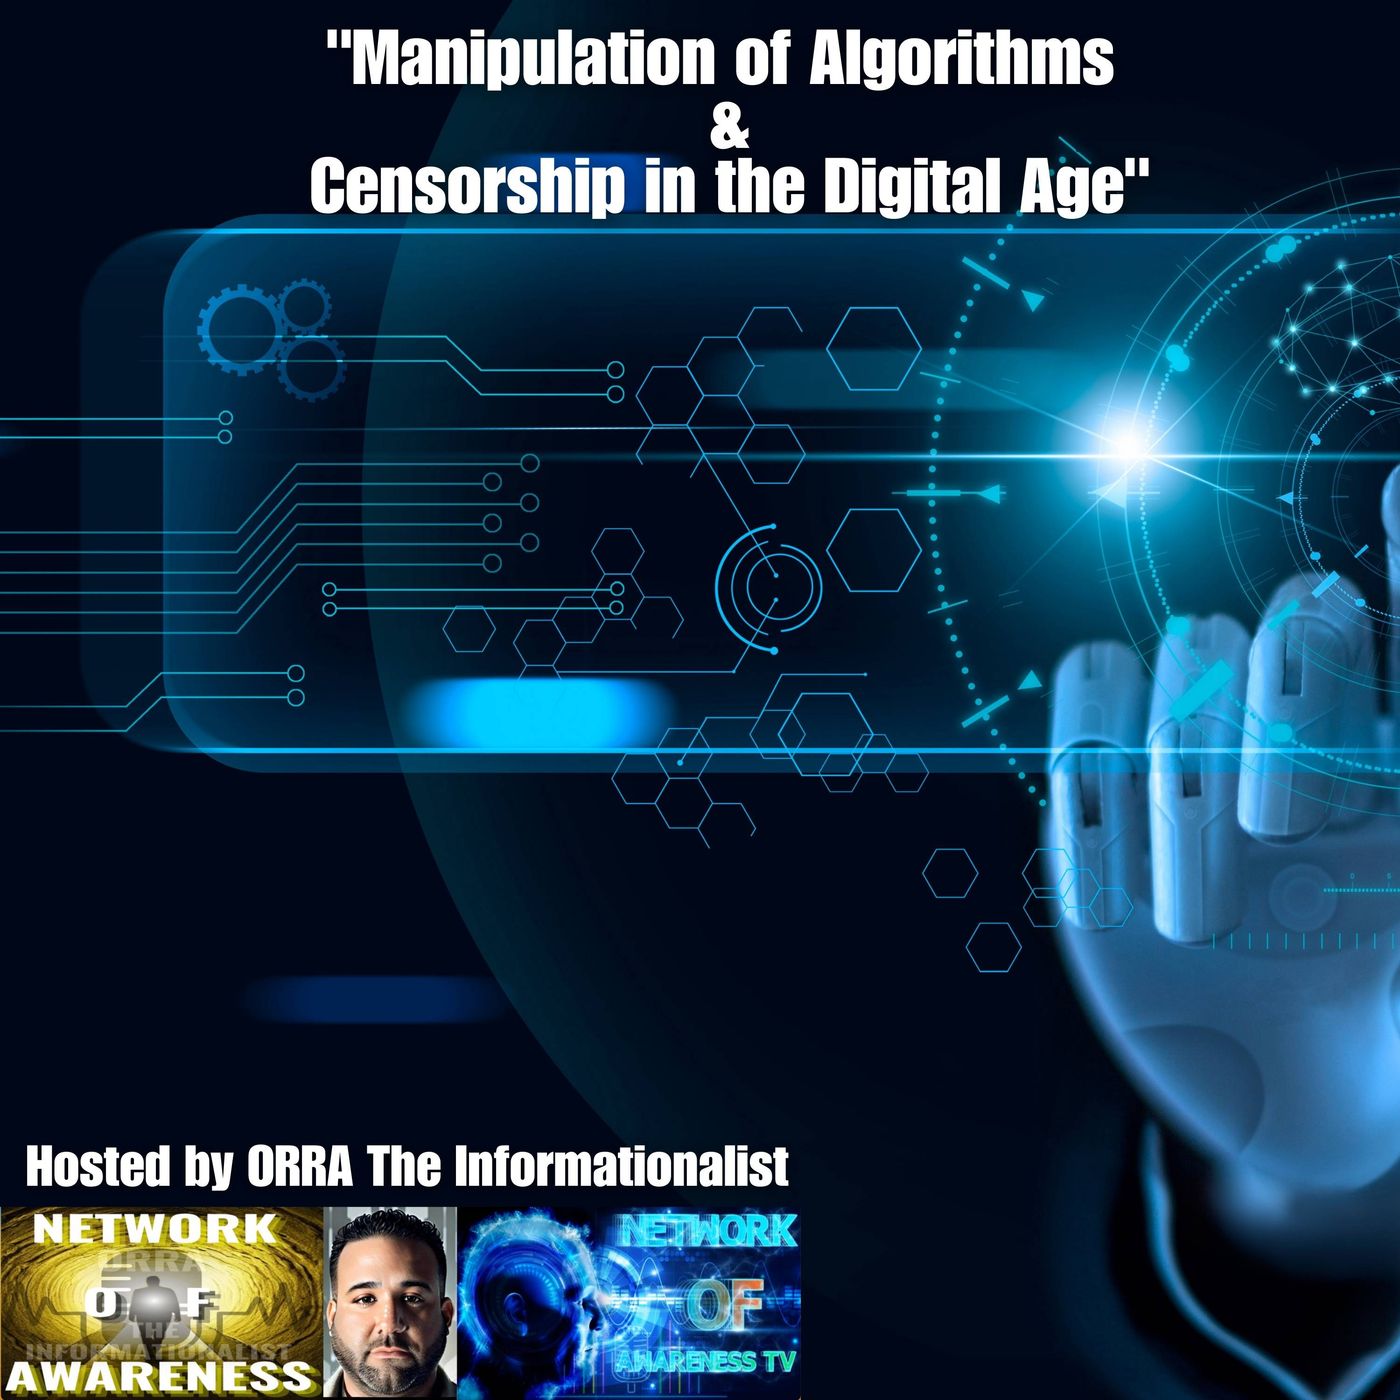 "Manipulation of Algorithms and Censorship in the Digital Age"